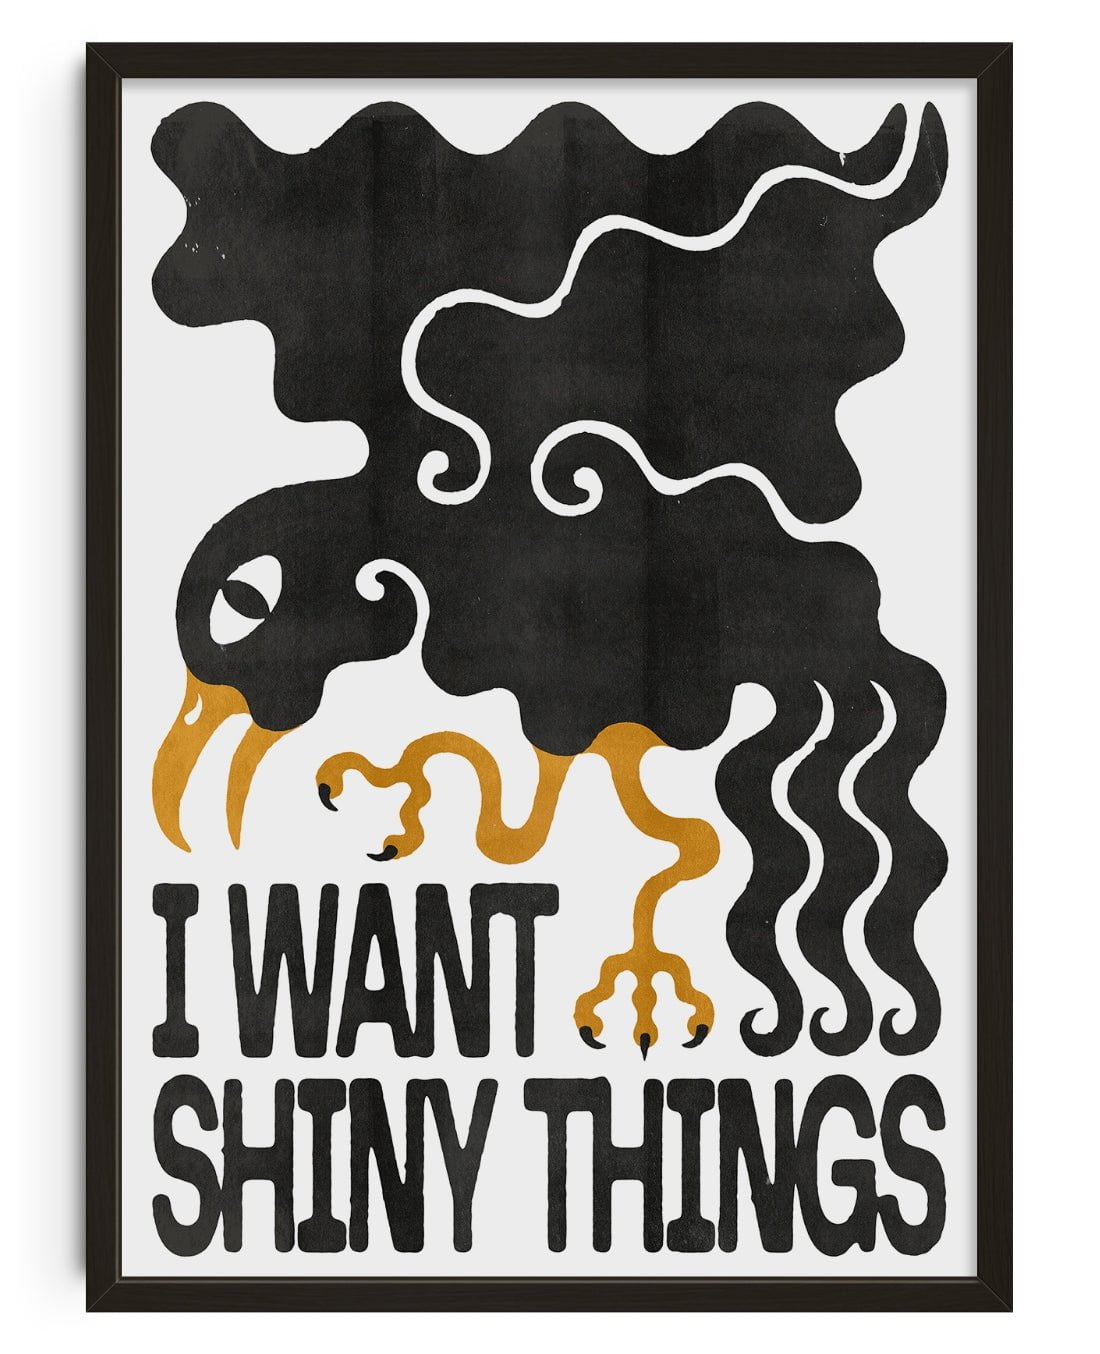 Shiny Things contemporary wall art print by Alexander Khabbazi - sold by DROOL